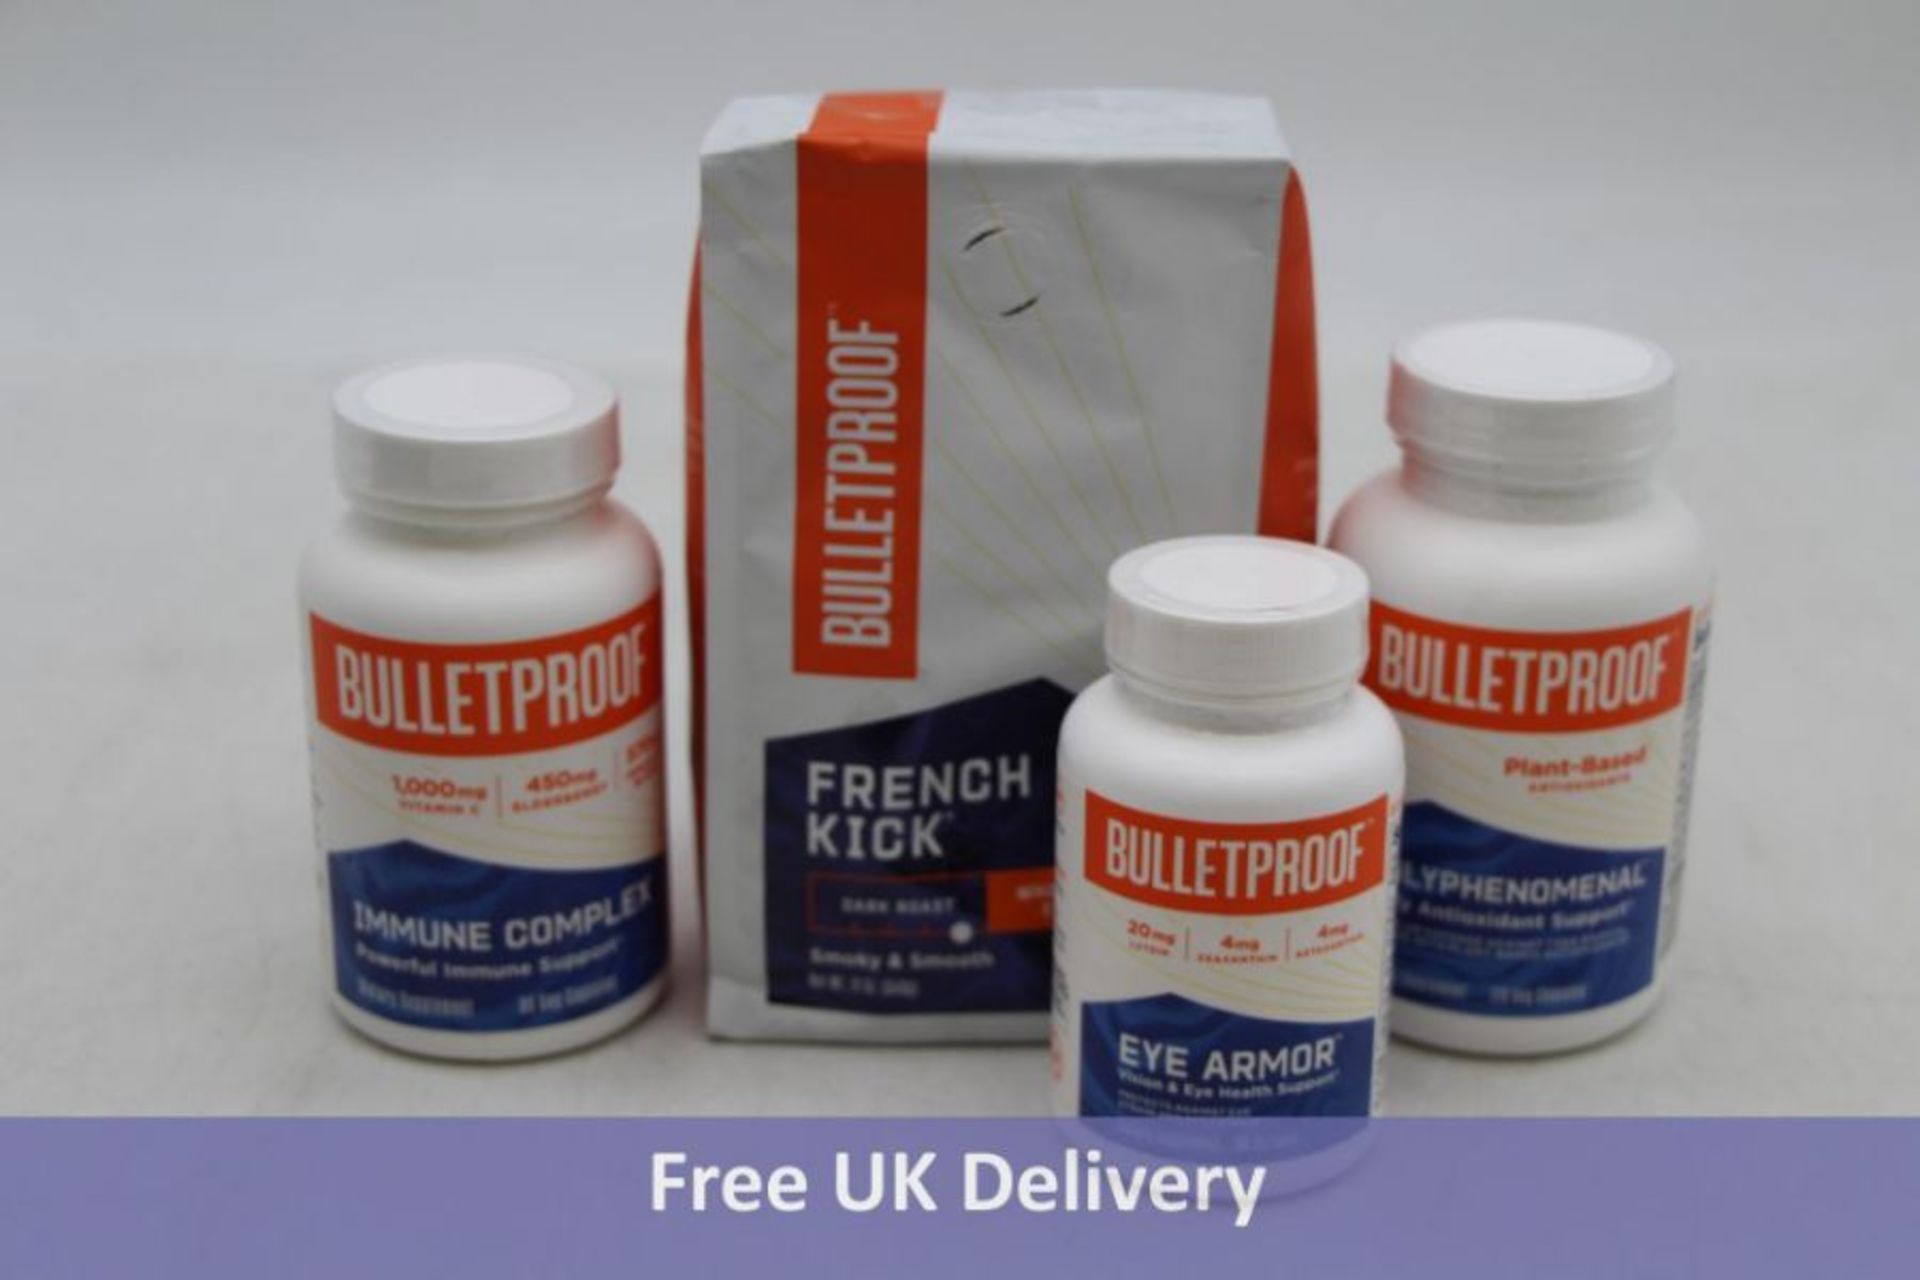 Four Bulletproof Supplements to include Polyphenomenal, Expiry 08/2023, Immune Complex, Expiry 04/20